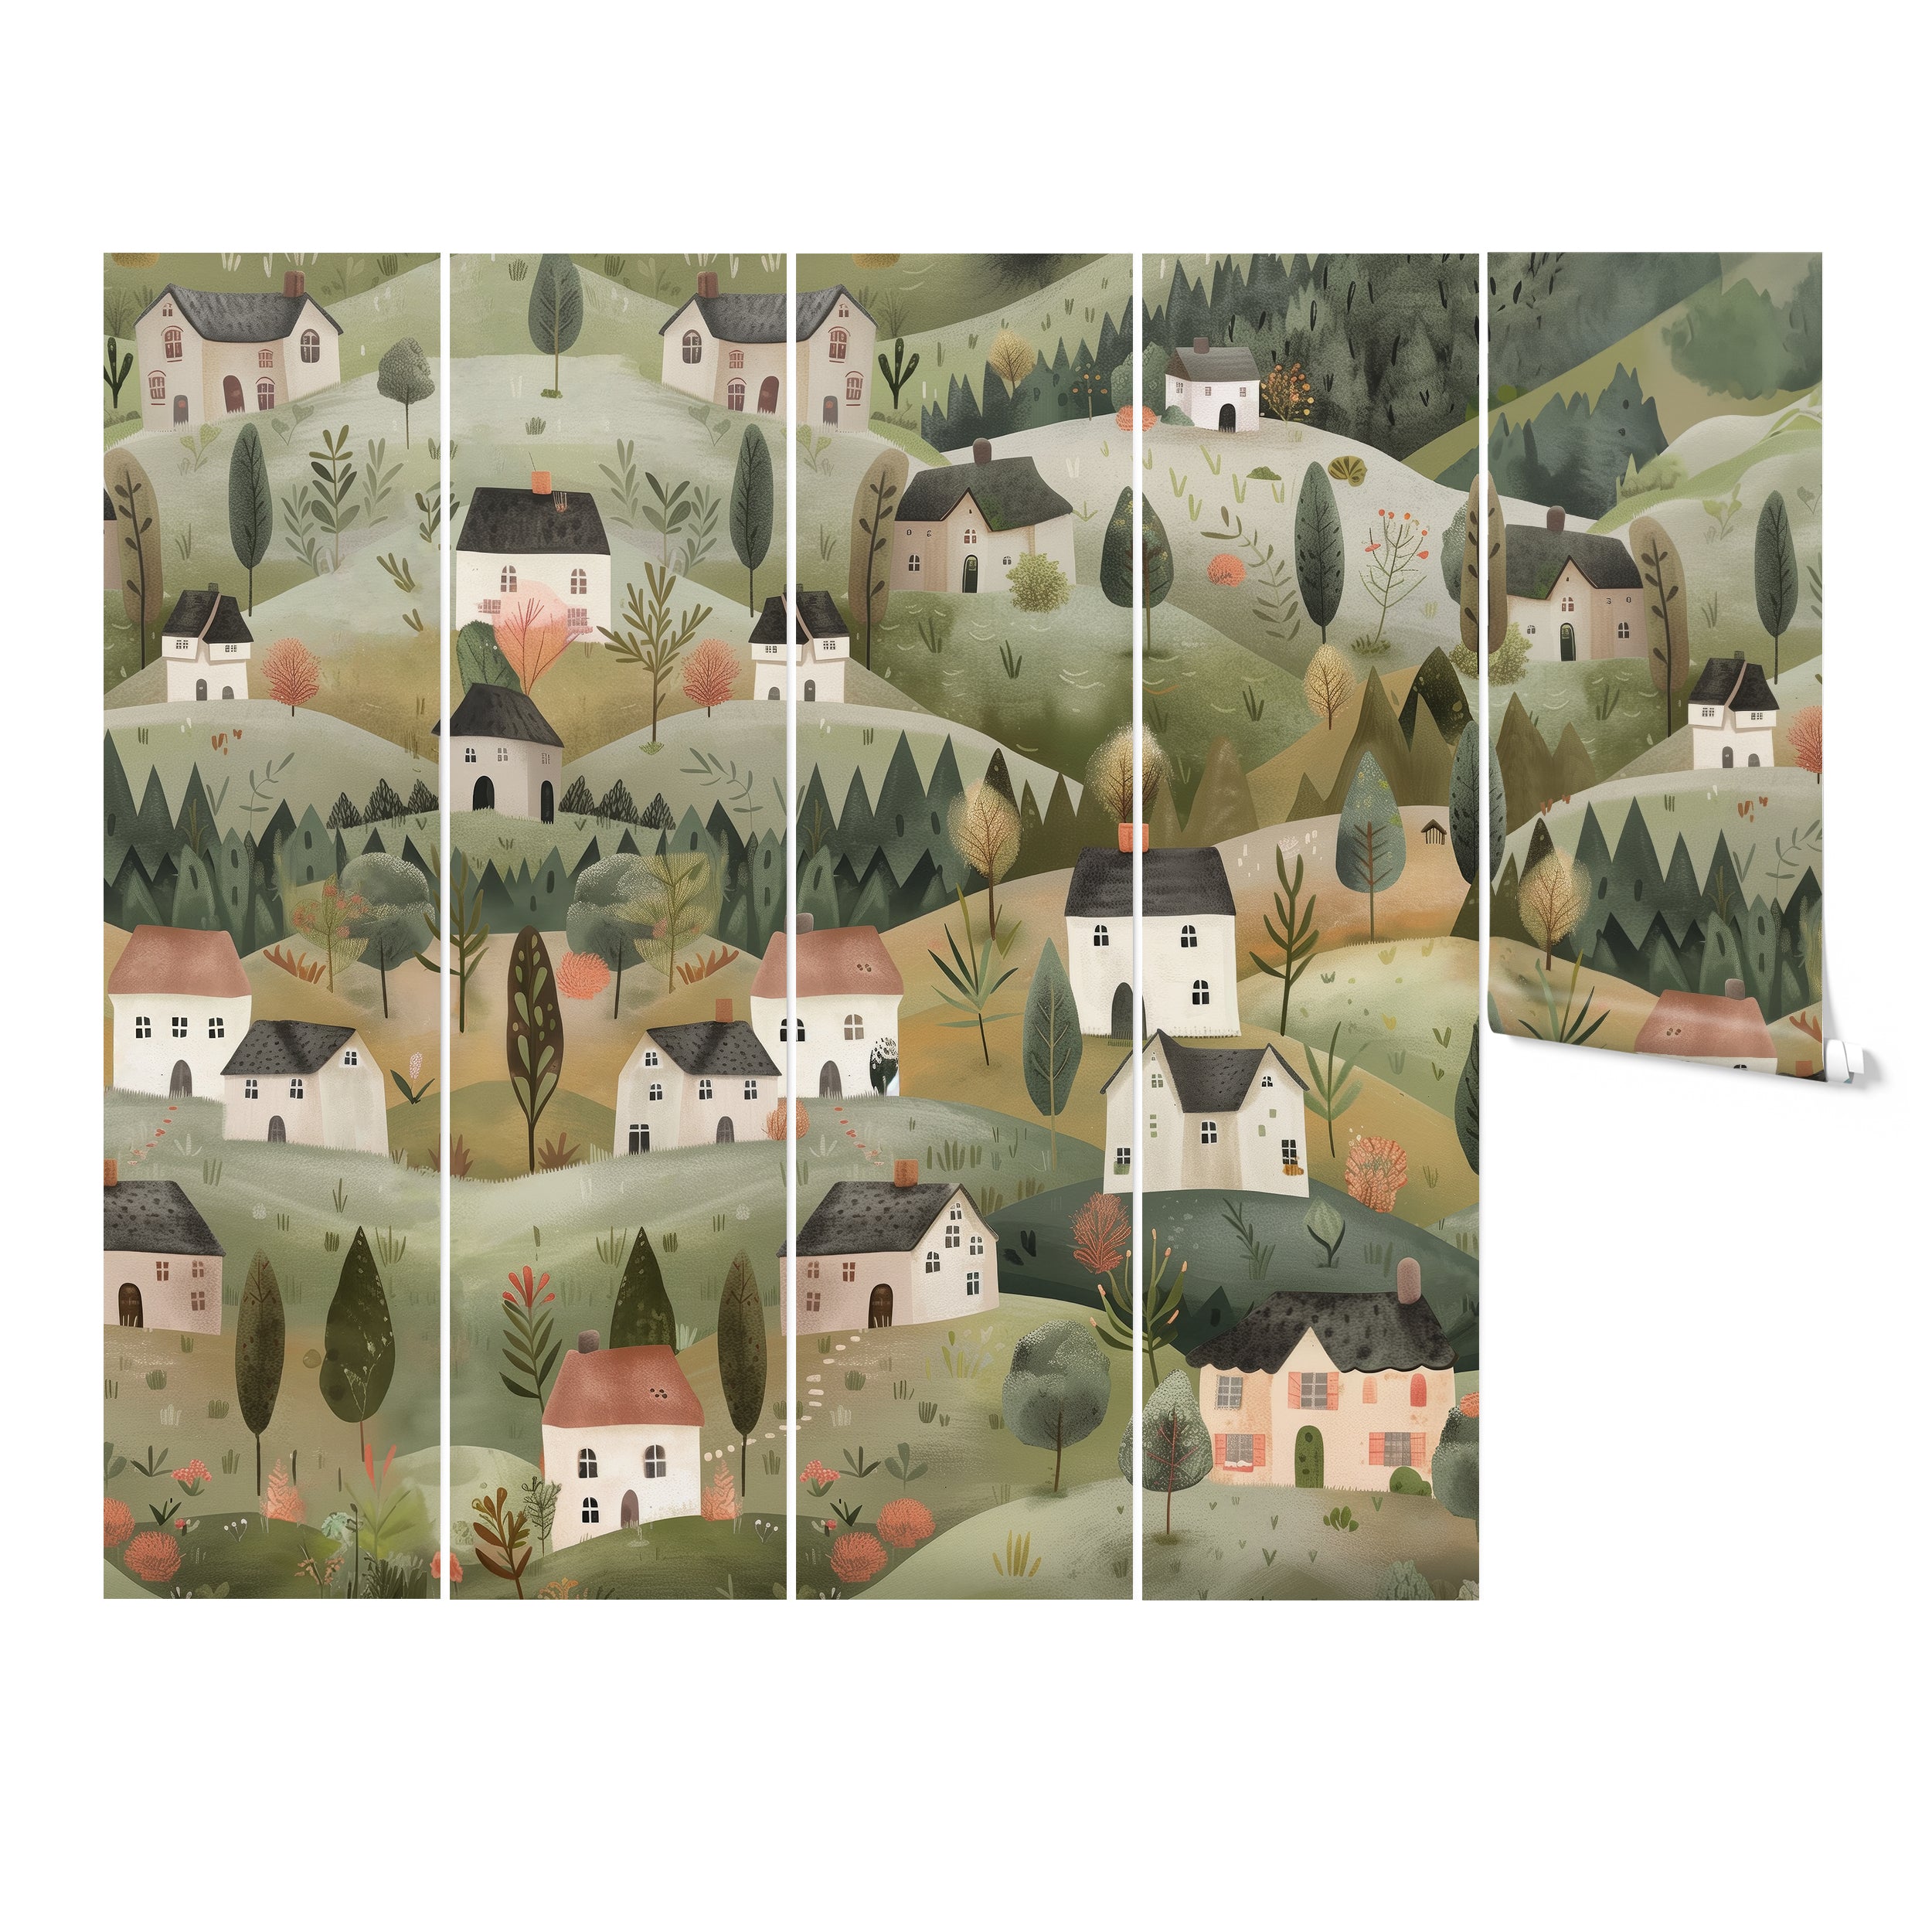 Hillier Mural wallpaper displayed in multiple panels showcasing a charming countryside with houses and trees.